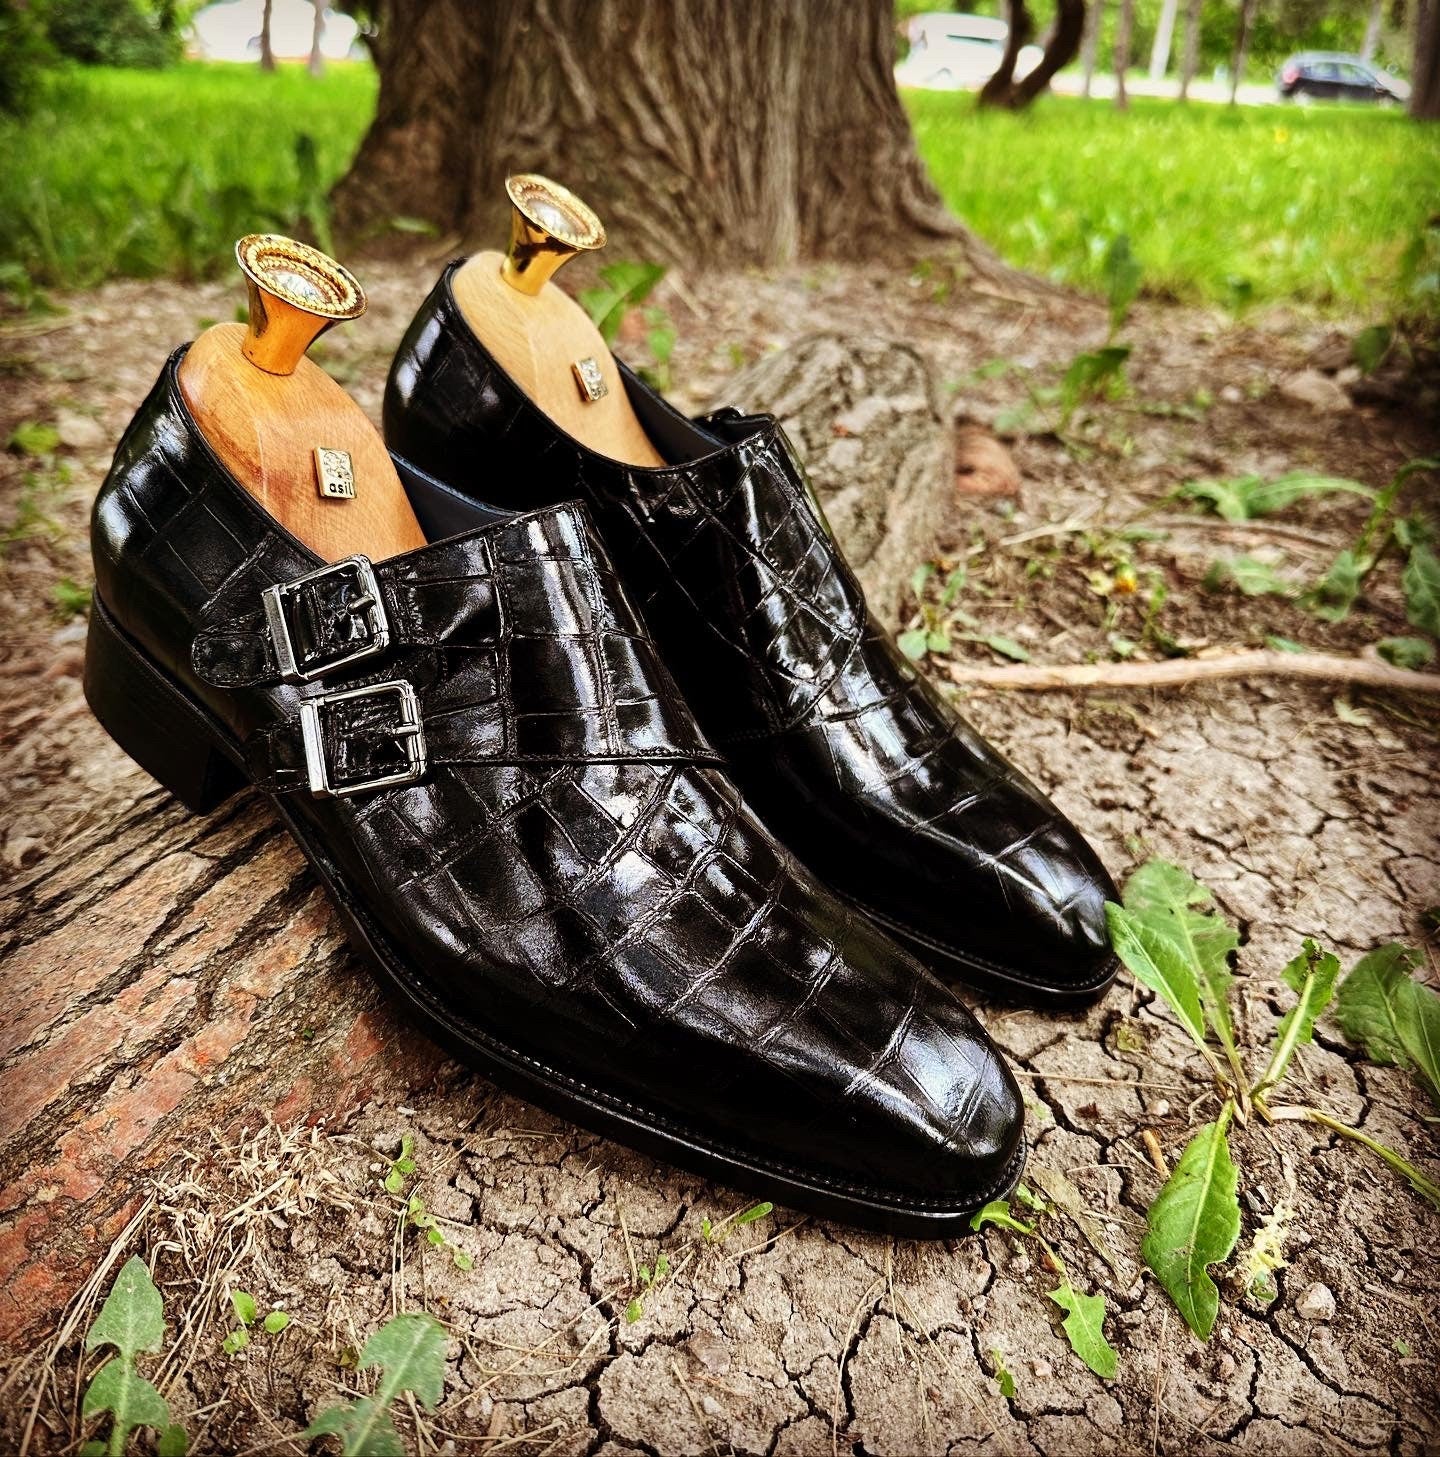 Black Croco Leather Monk Strap Dress Shoes Leather Sole Alligator Print Made-To-Order Bespoke Shoes